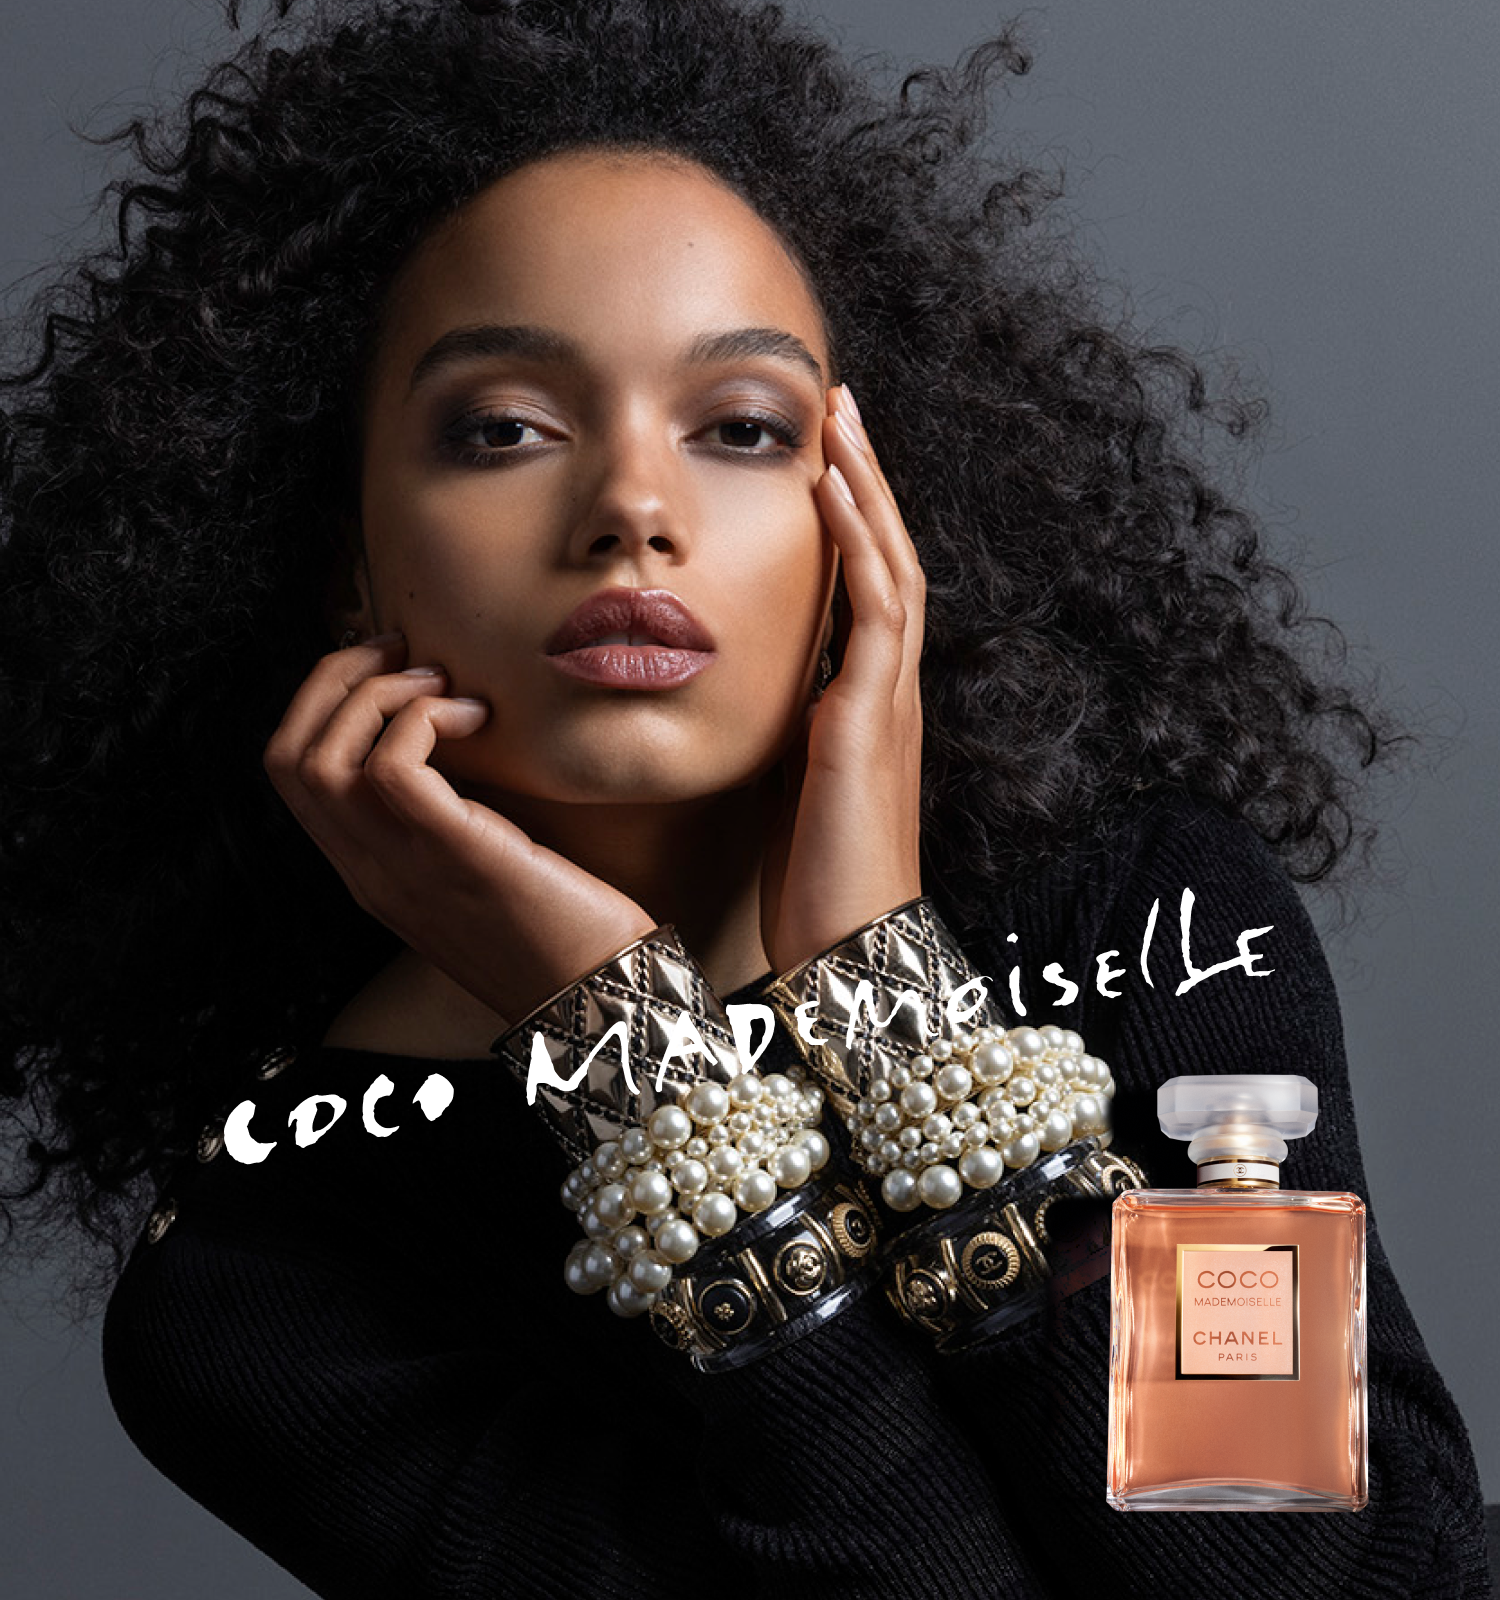 chanel-fragrance-coco-mademoiselle-banner